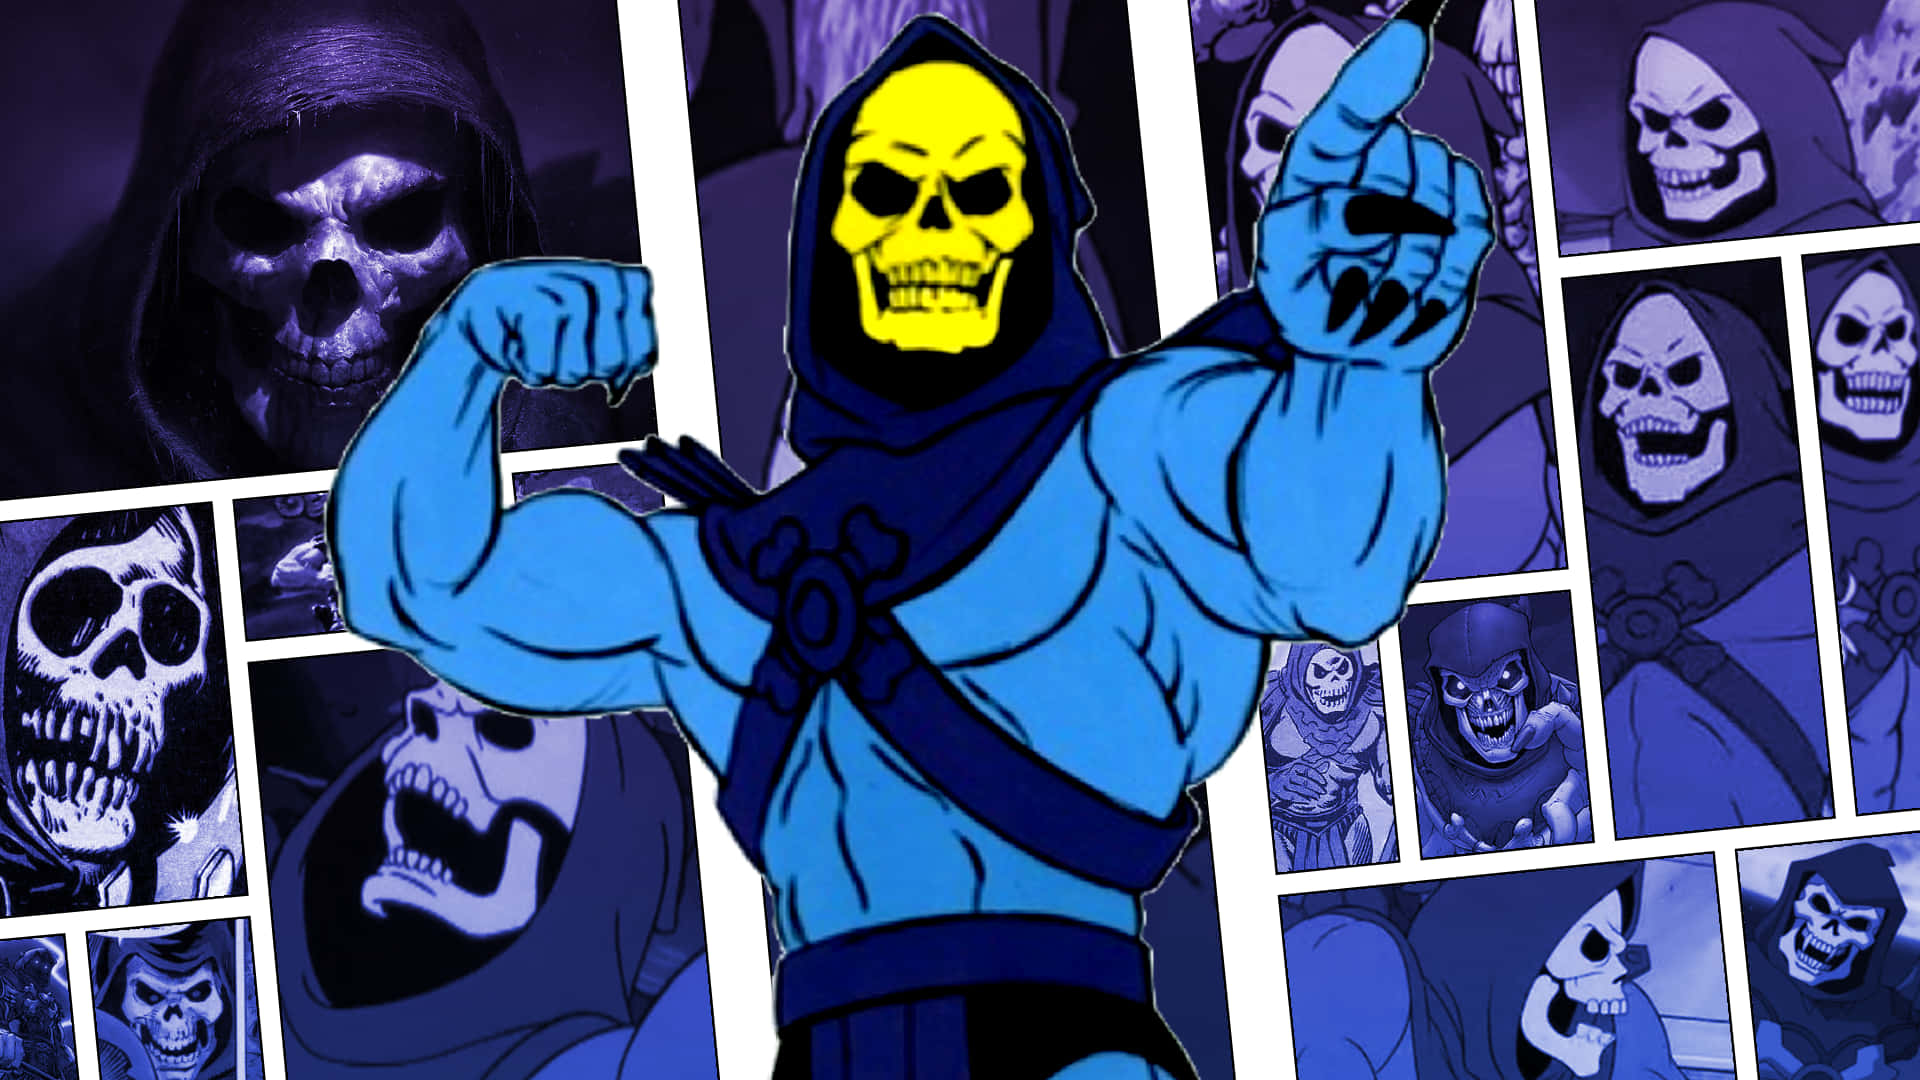 A Cartoon Character With A Blue Mask And Blue Eyes